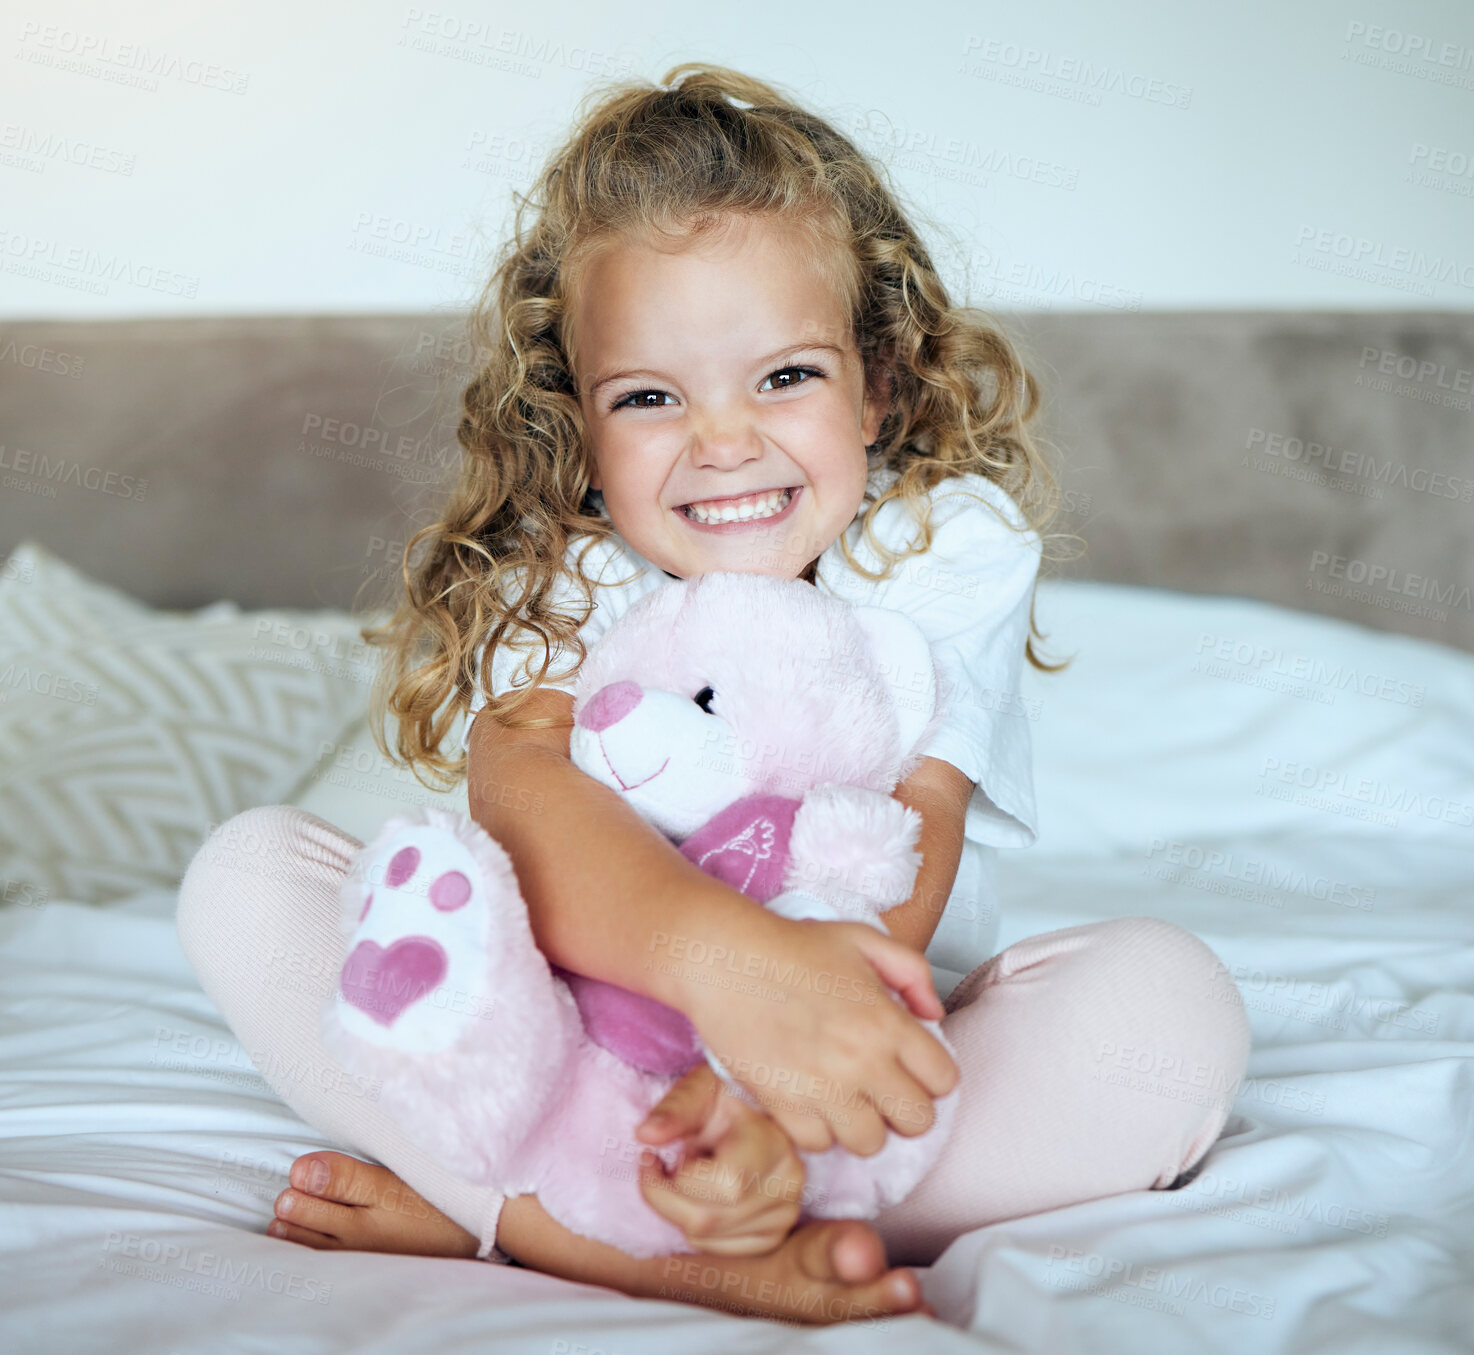 Buy stock photo Children, teddy bear and girl child hug her stuffed animal with a smile in her house. Portrait of kid, happy and safe with an adorable or cute female holding a fluffy toy sitting on a bed